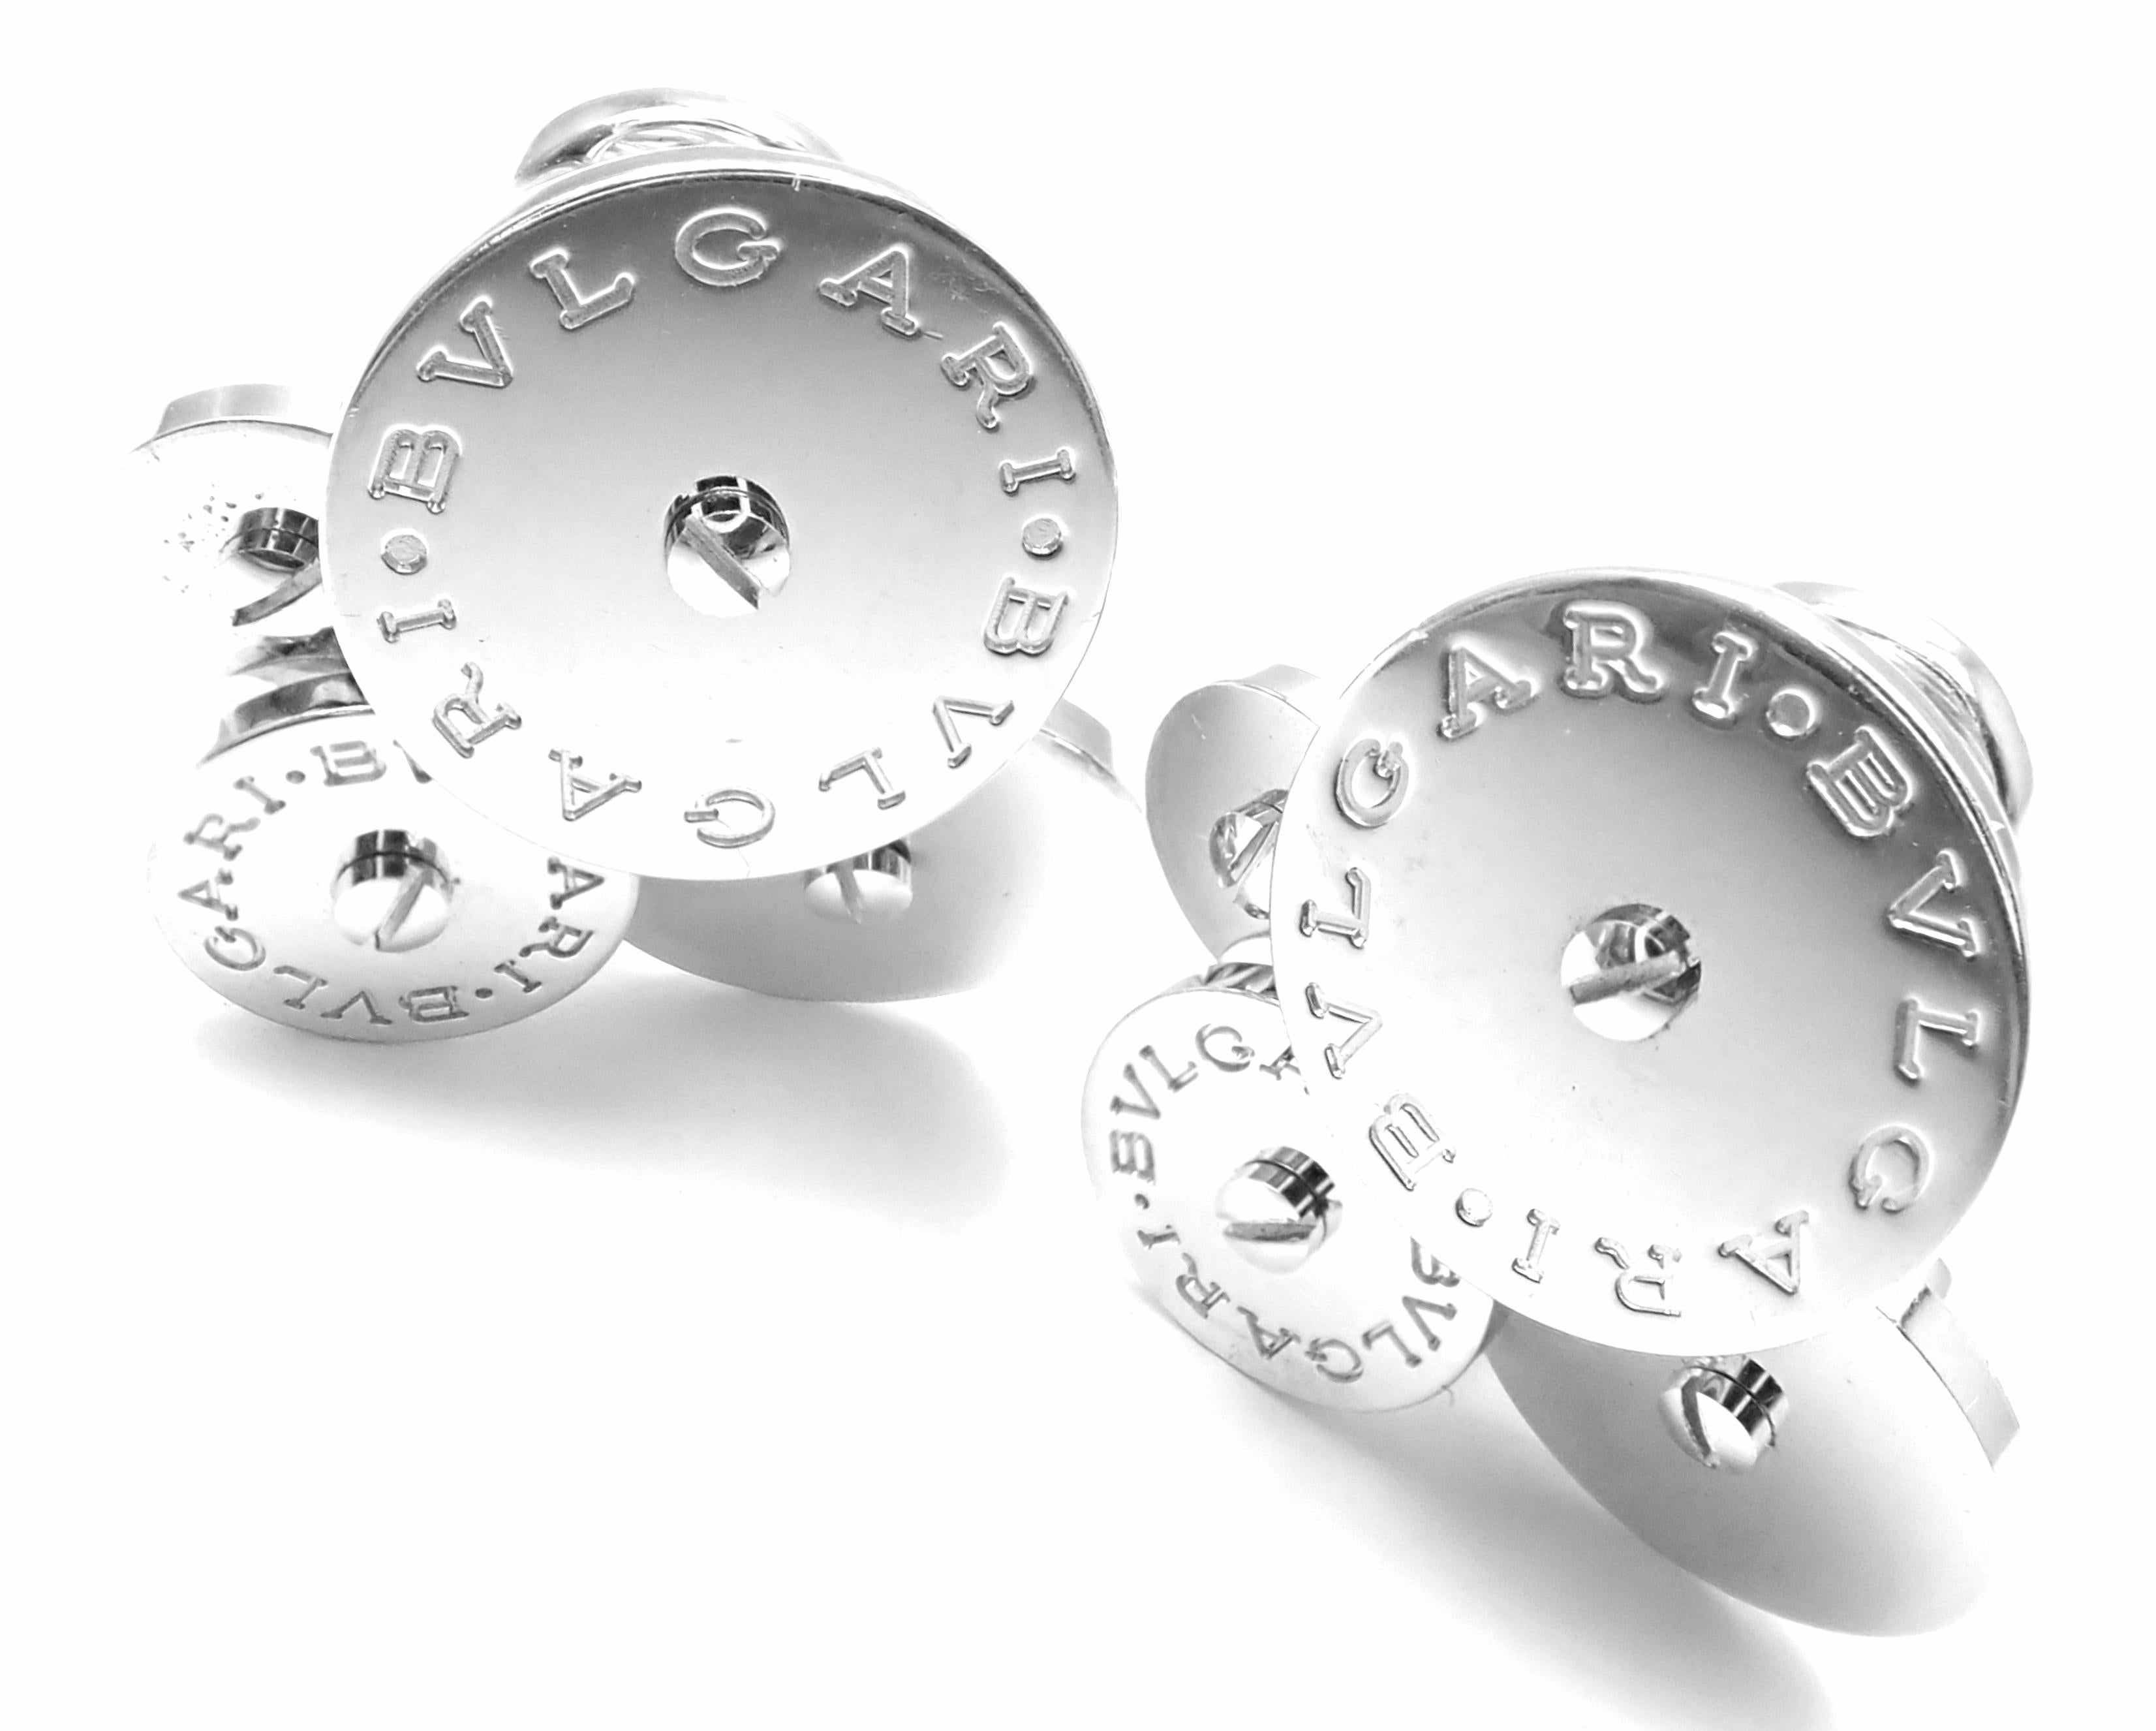 18k White Gold Cicladi Earrings by Bulgari.
Details:
Weight: 15.7 grams
Measurements: 18mm x 19mm
Stamped Hallmarks: Bvlgari, 750, 2337AL, Made in Italy
*Free Shipping within the United States*
YOUR PRICE: $1,600
T2359aae